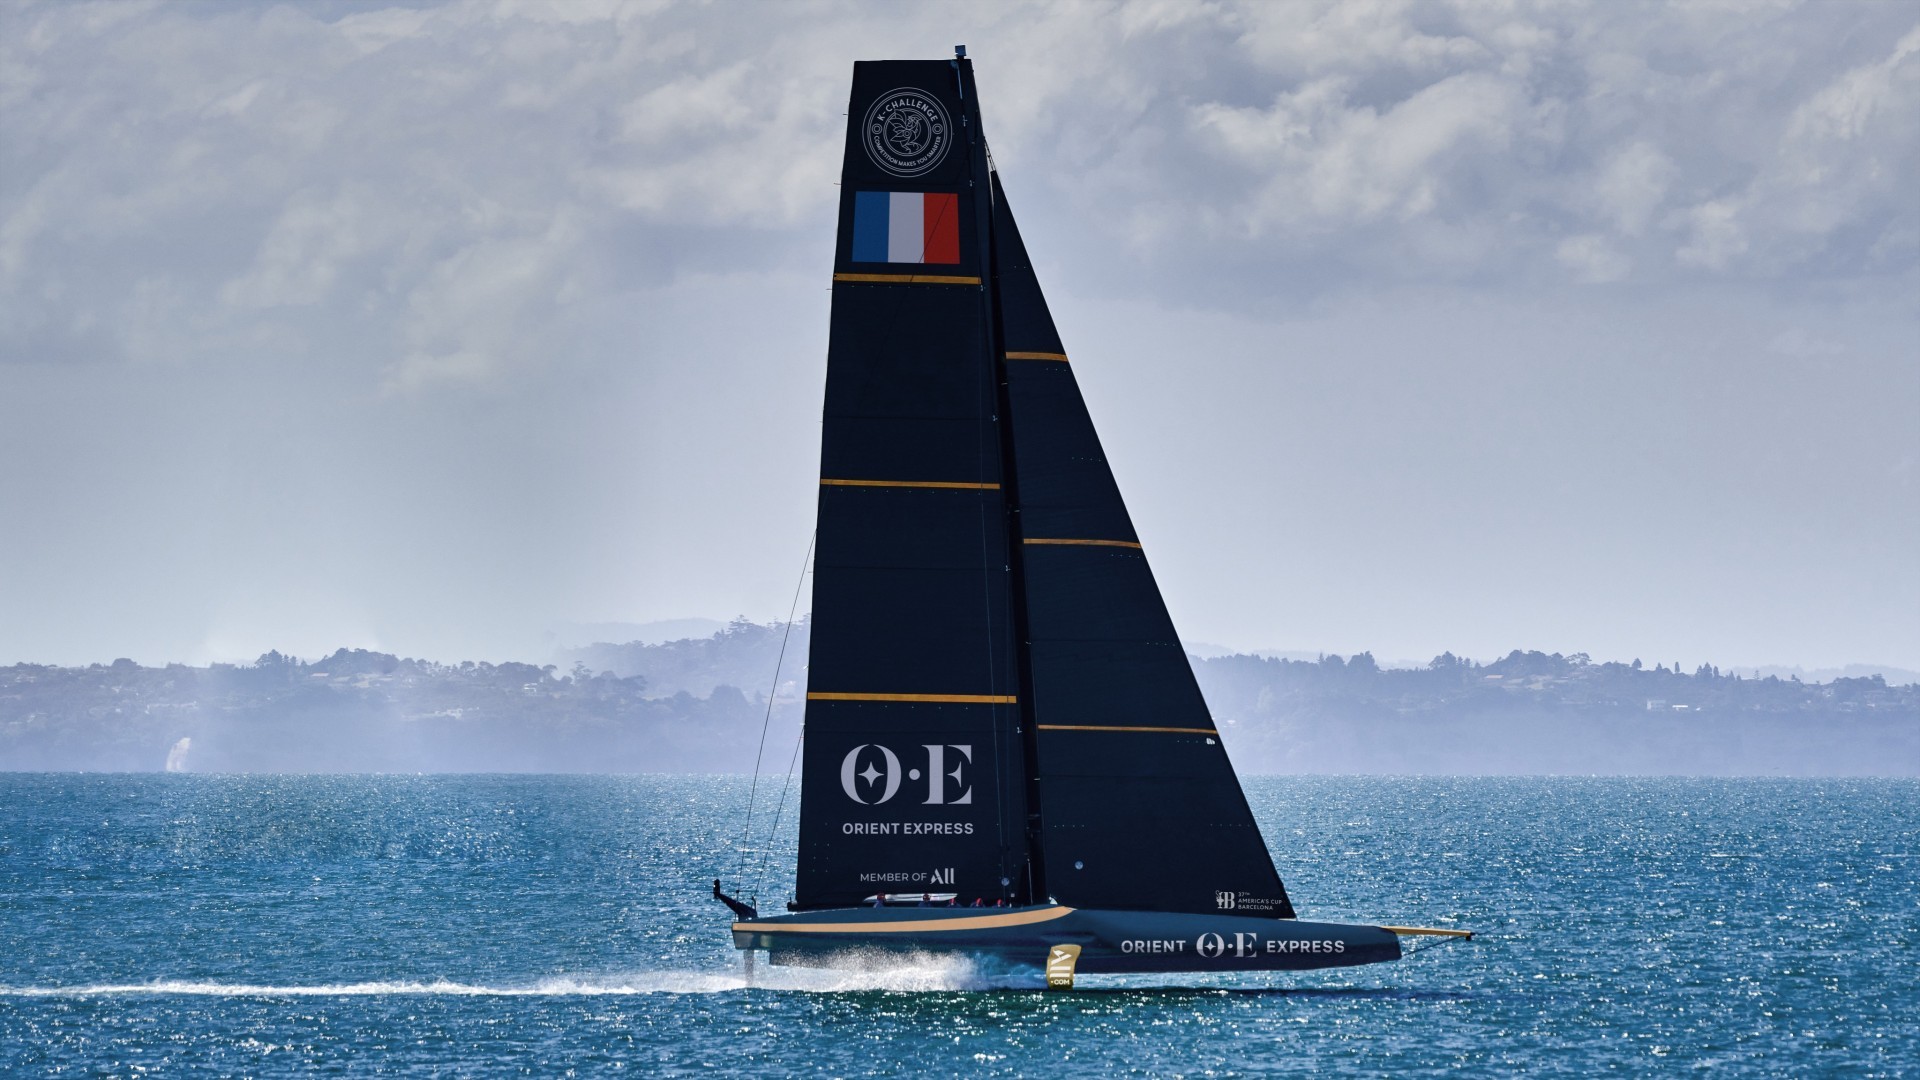 The French challenger for the 37th America's Cup is named Orient Express